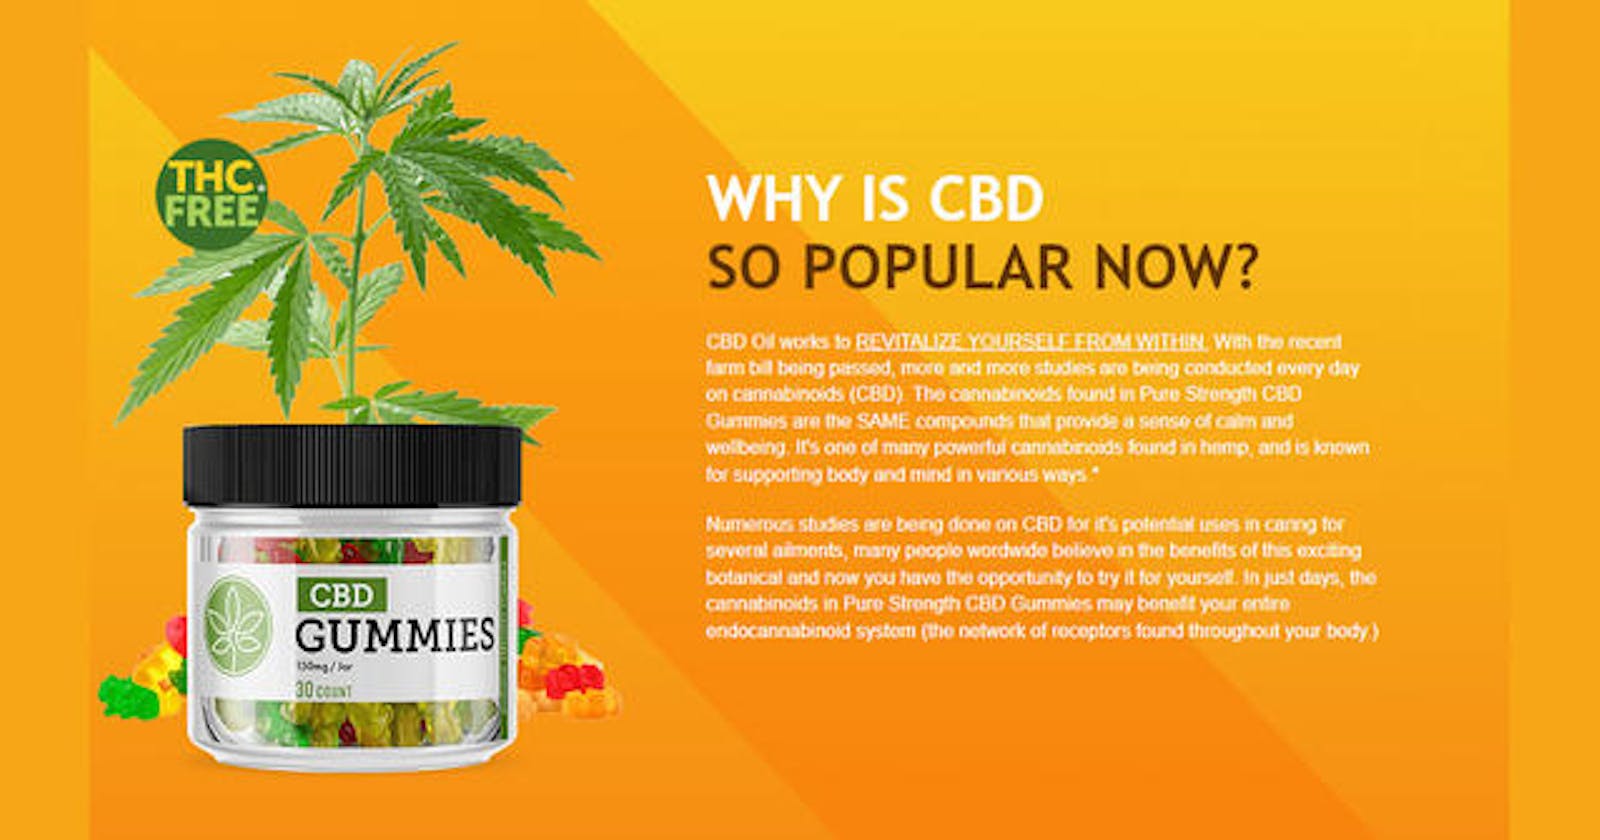 Copd CBD Gummies Reviews, Side Effects! Get The Best Price Now!